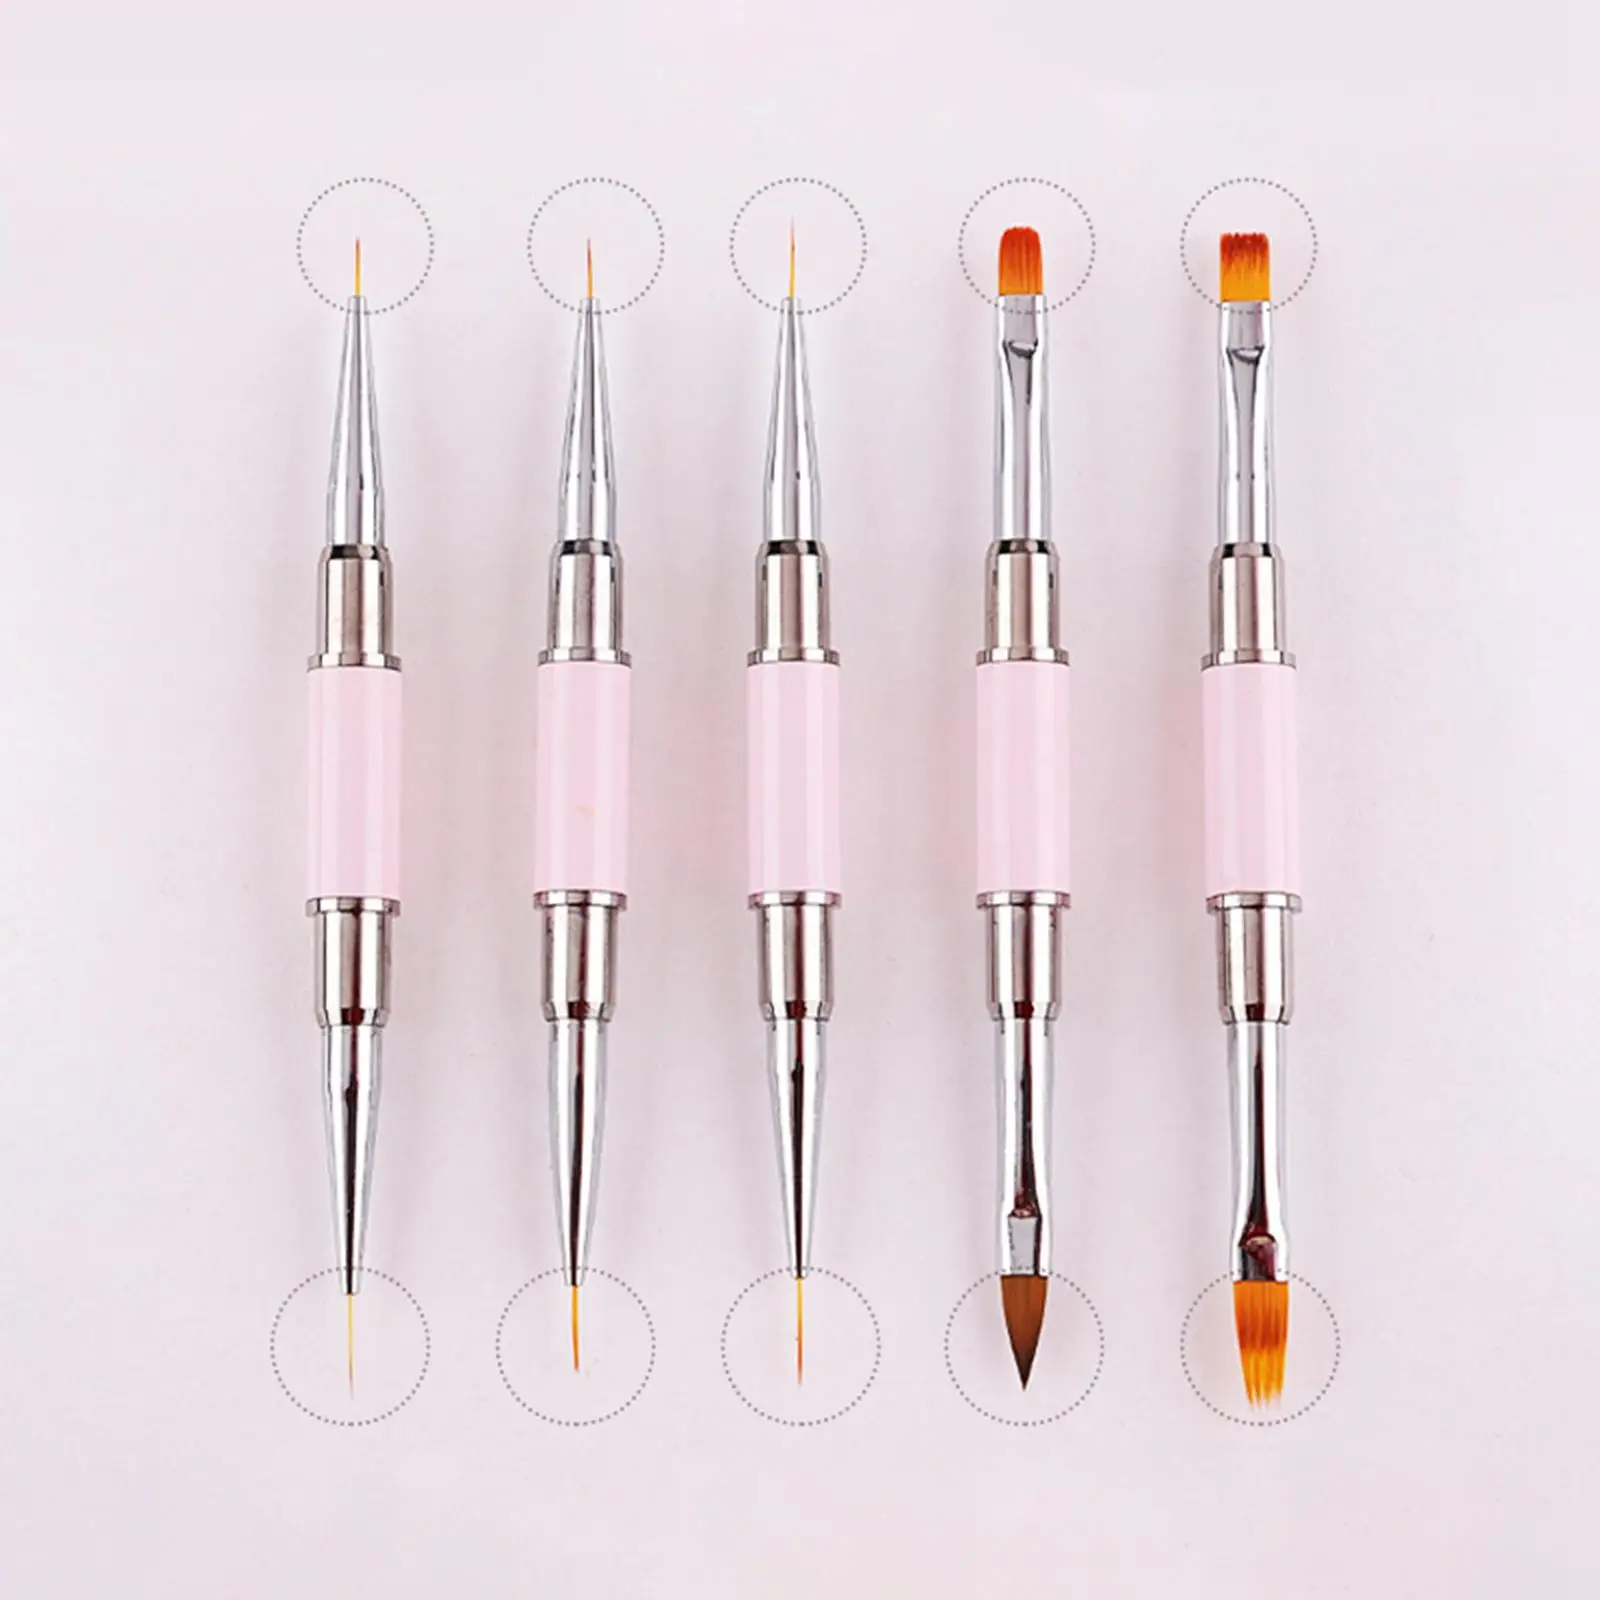 5 Pieces Double Ended Nail Art Brushes for Professional Nail Salon Home Use